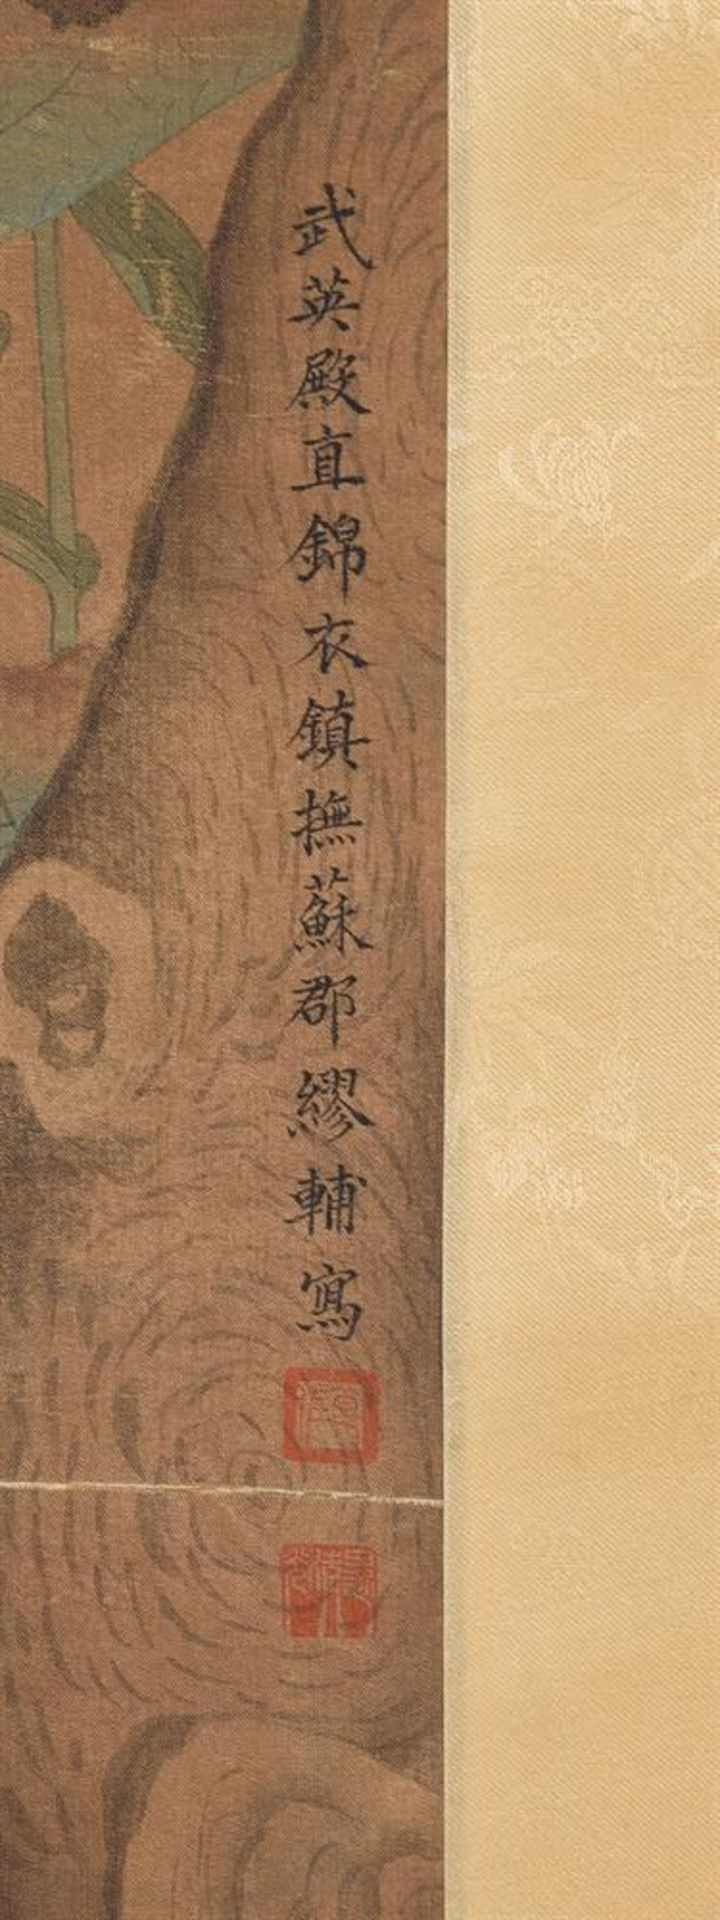 Signed Liao Fu (Qing Dynasty) - Image 2 of 6